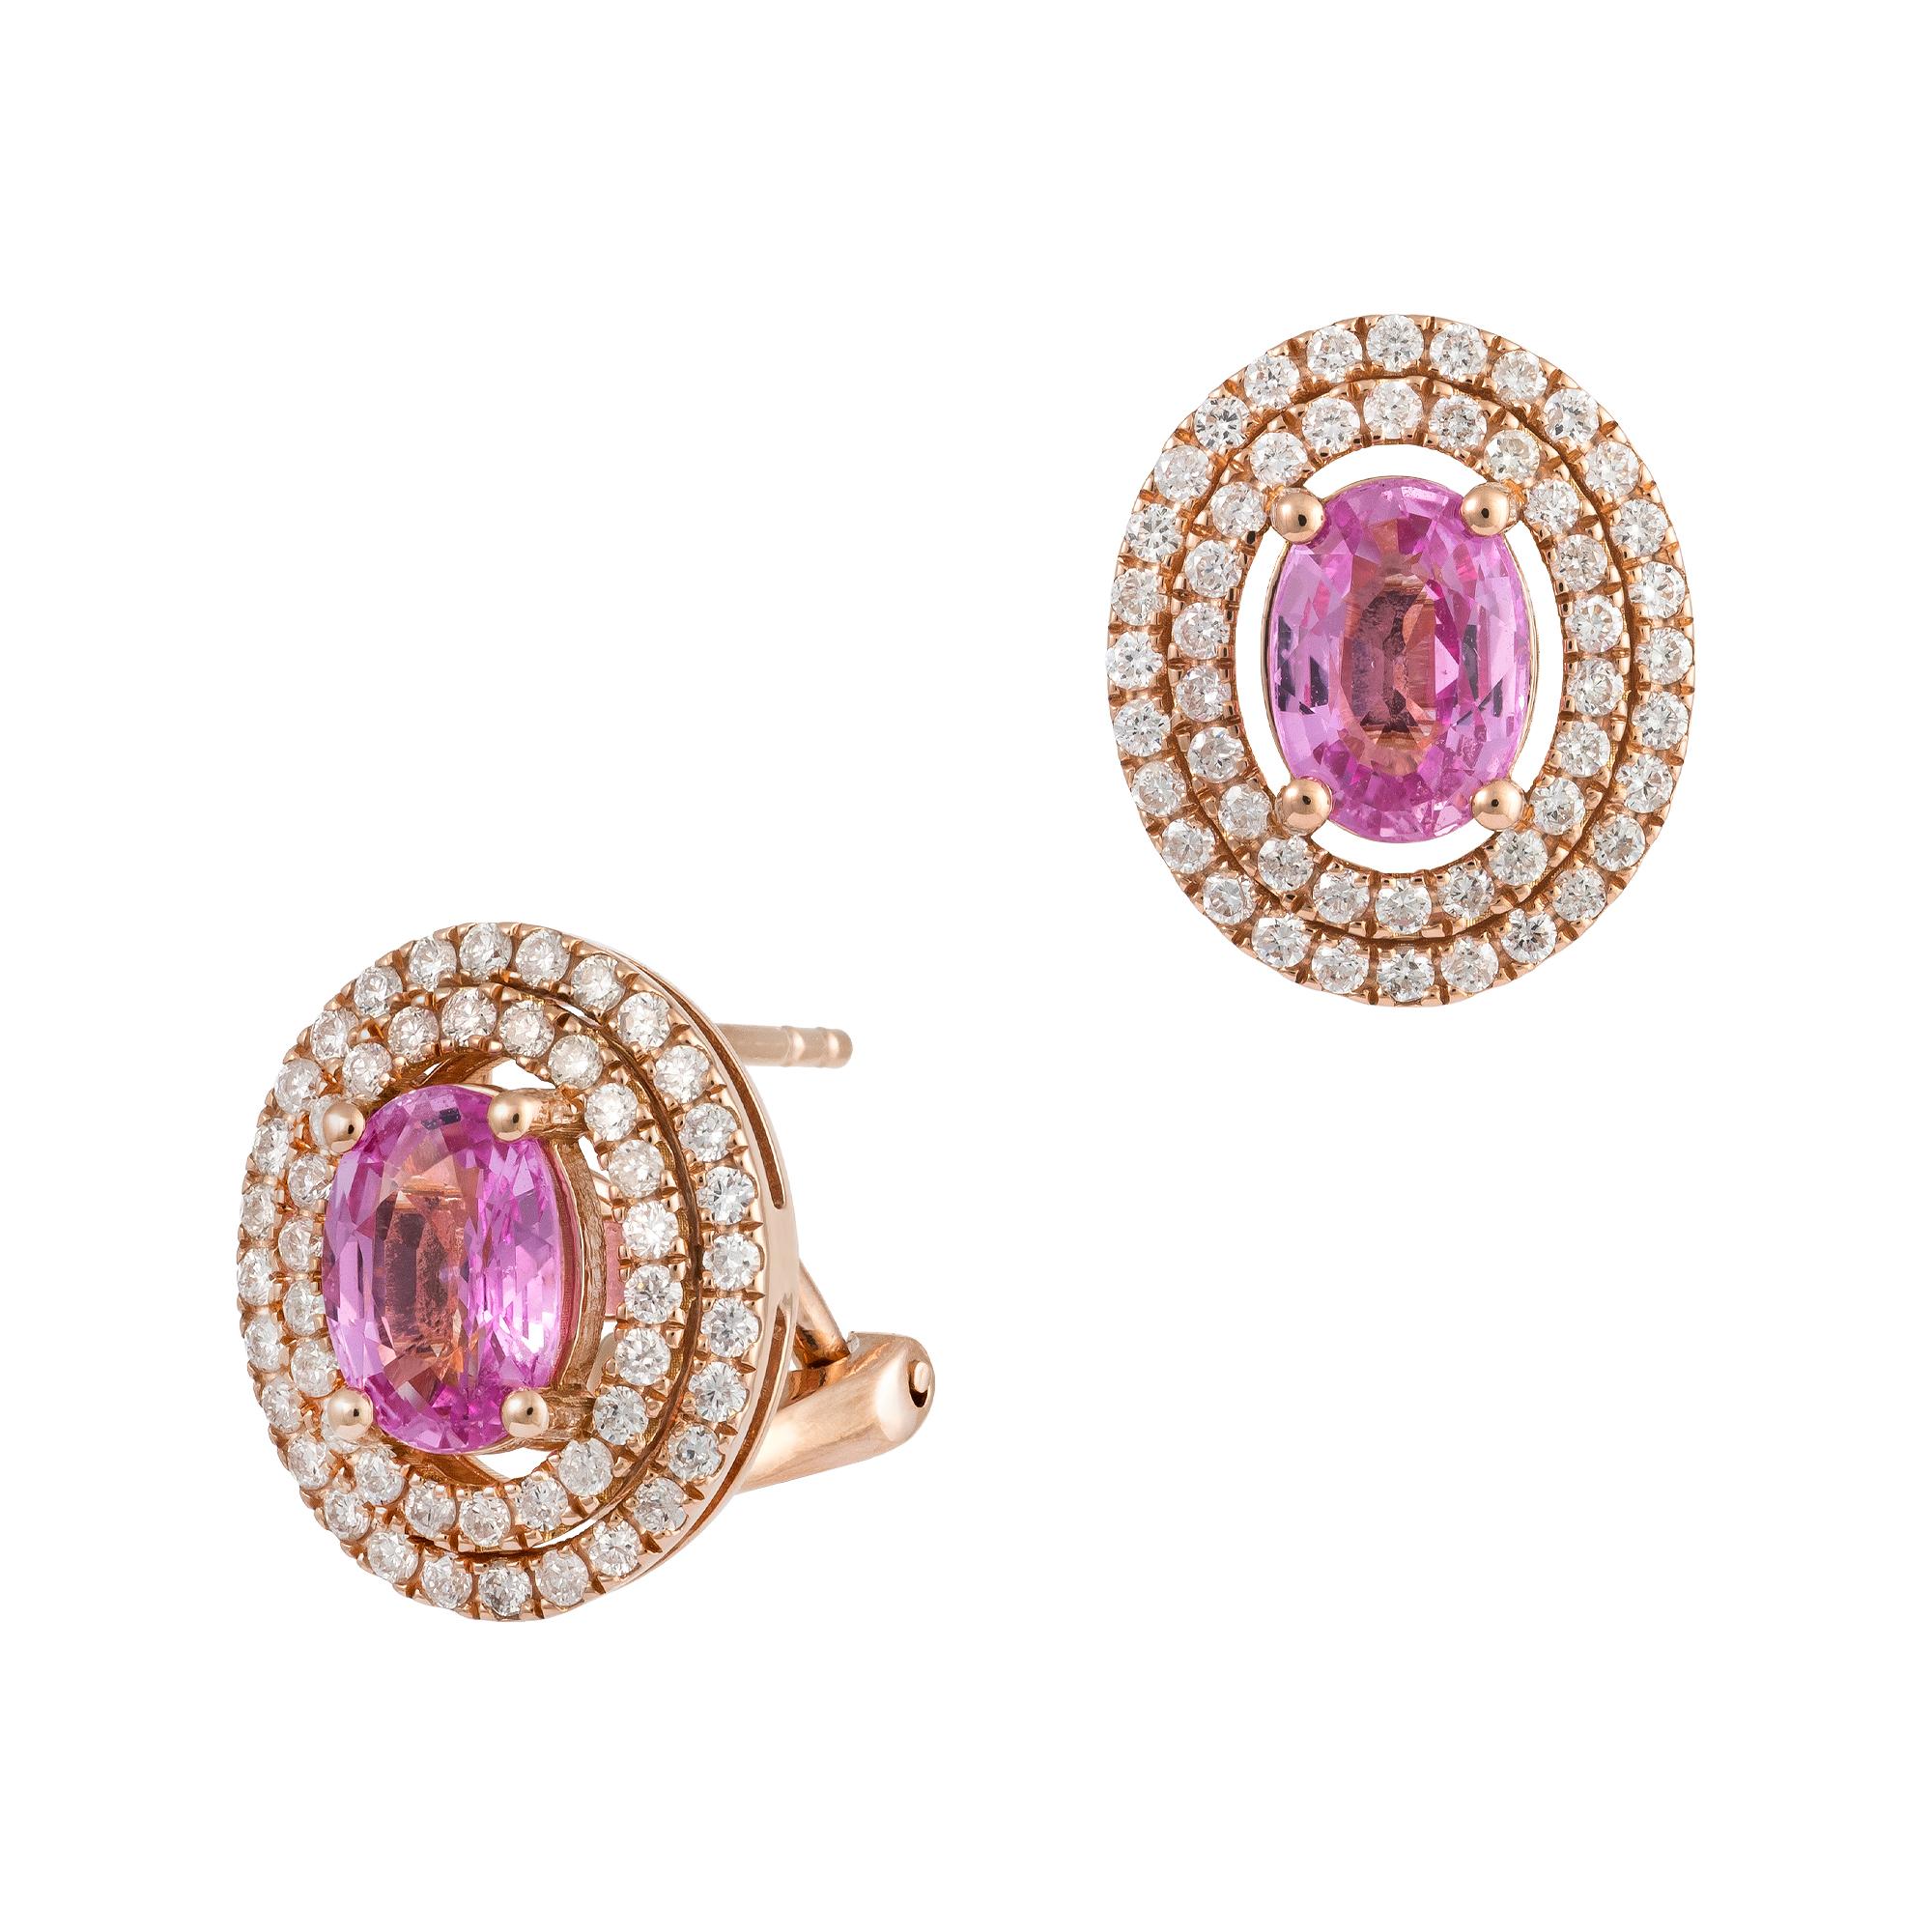 The Following Items we are offering is this Rare Important Radiant 18KT Gold Gorgeous Glittering and Sparkling Magnificent Fancy Oval Cut Pink Sapphire Stud Earrings. Earrings contain approx 3CTS of Beautiful Fancy Oval Cut Pink Sapphires! with